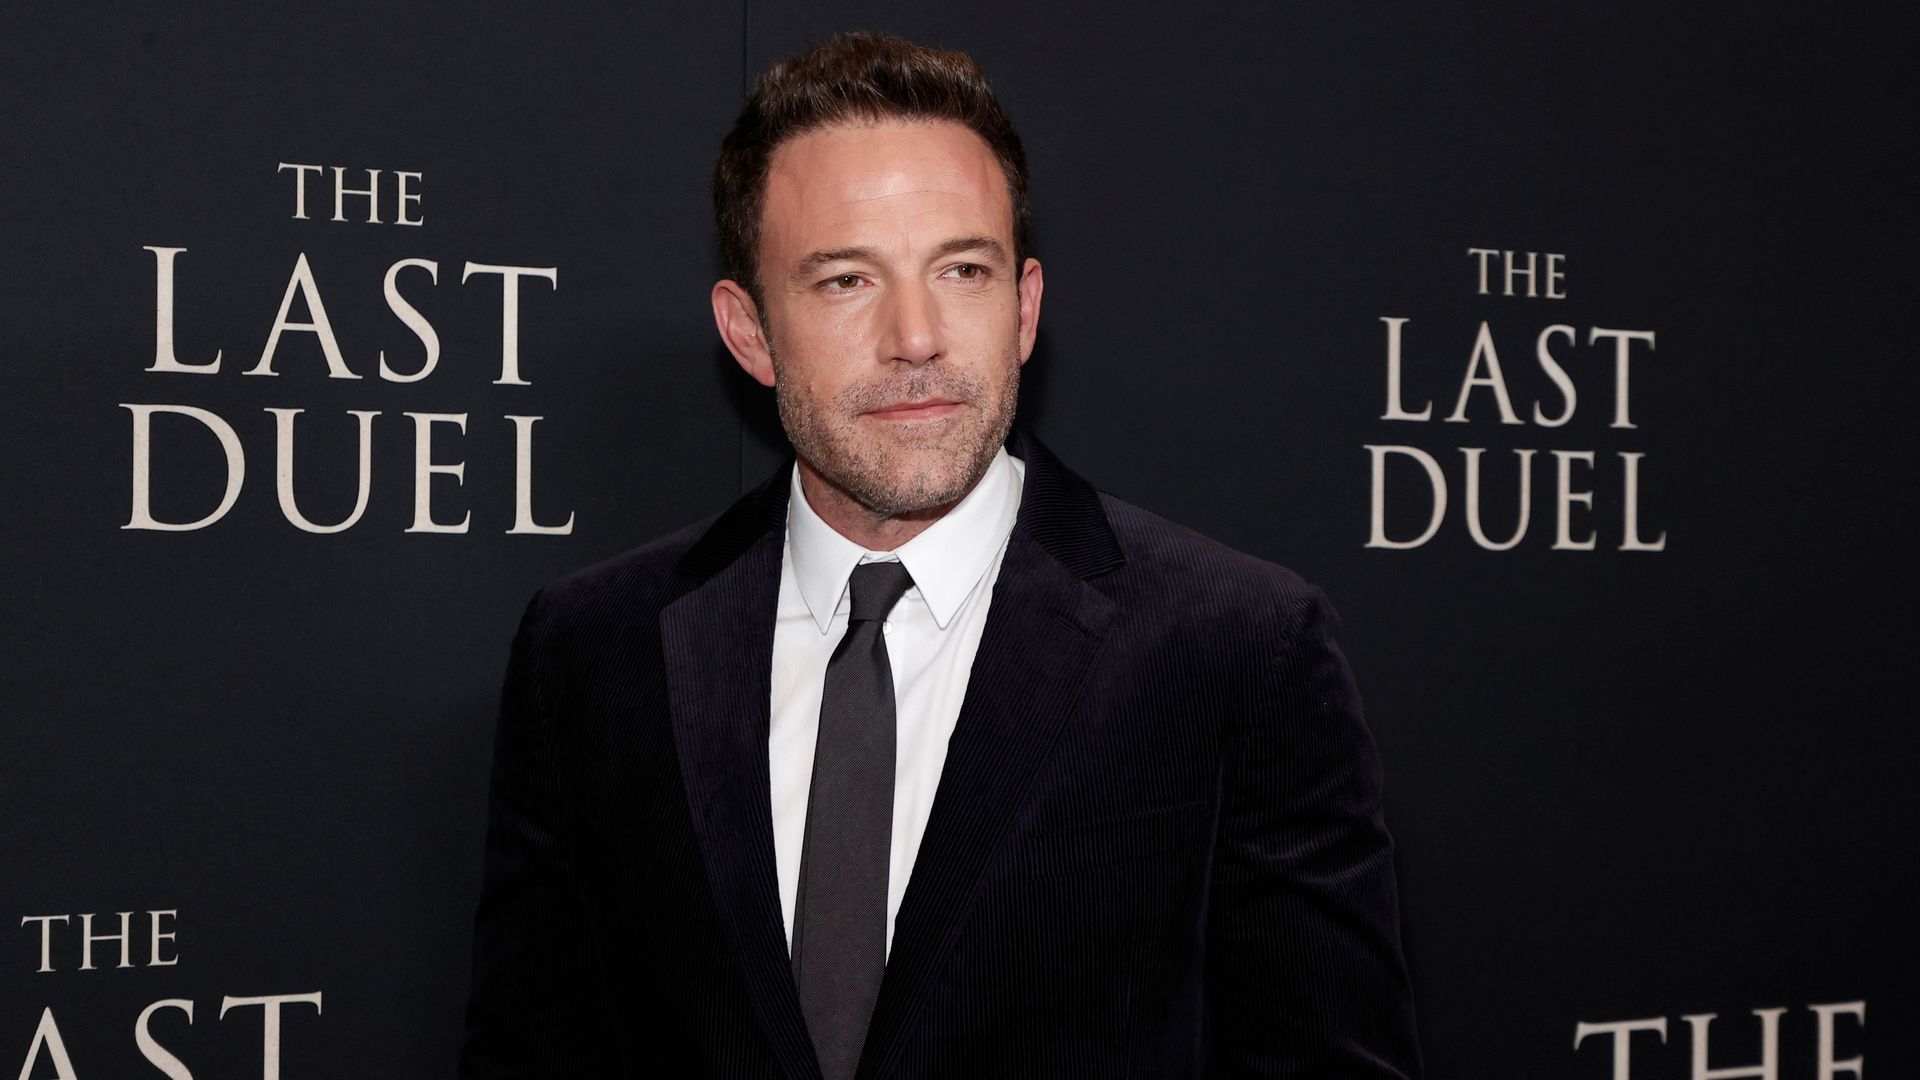  Ben Affleck attends "The Last Duel" New York Premiere on October 09, 2021 in New York City.